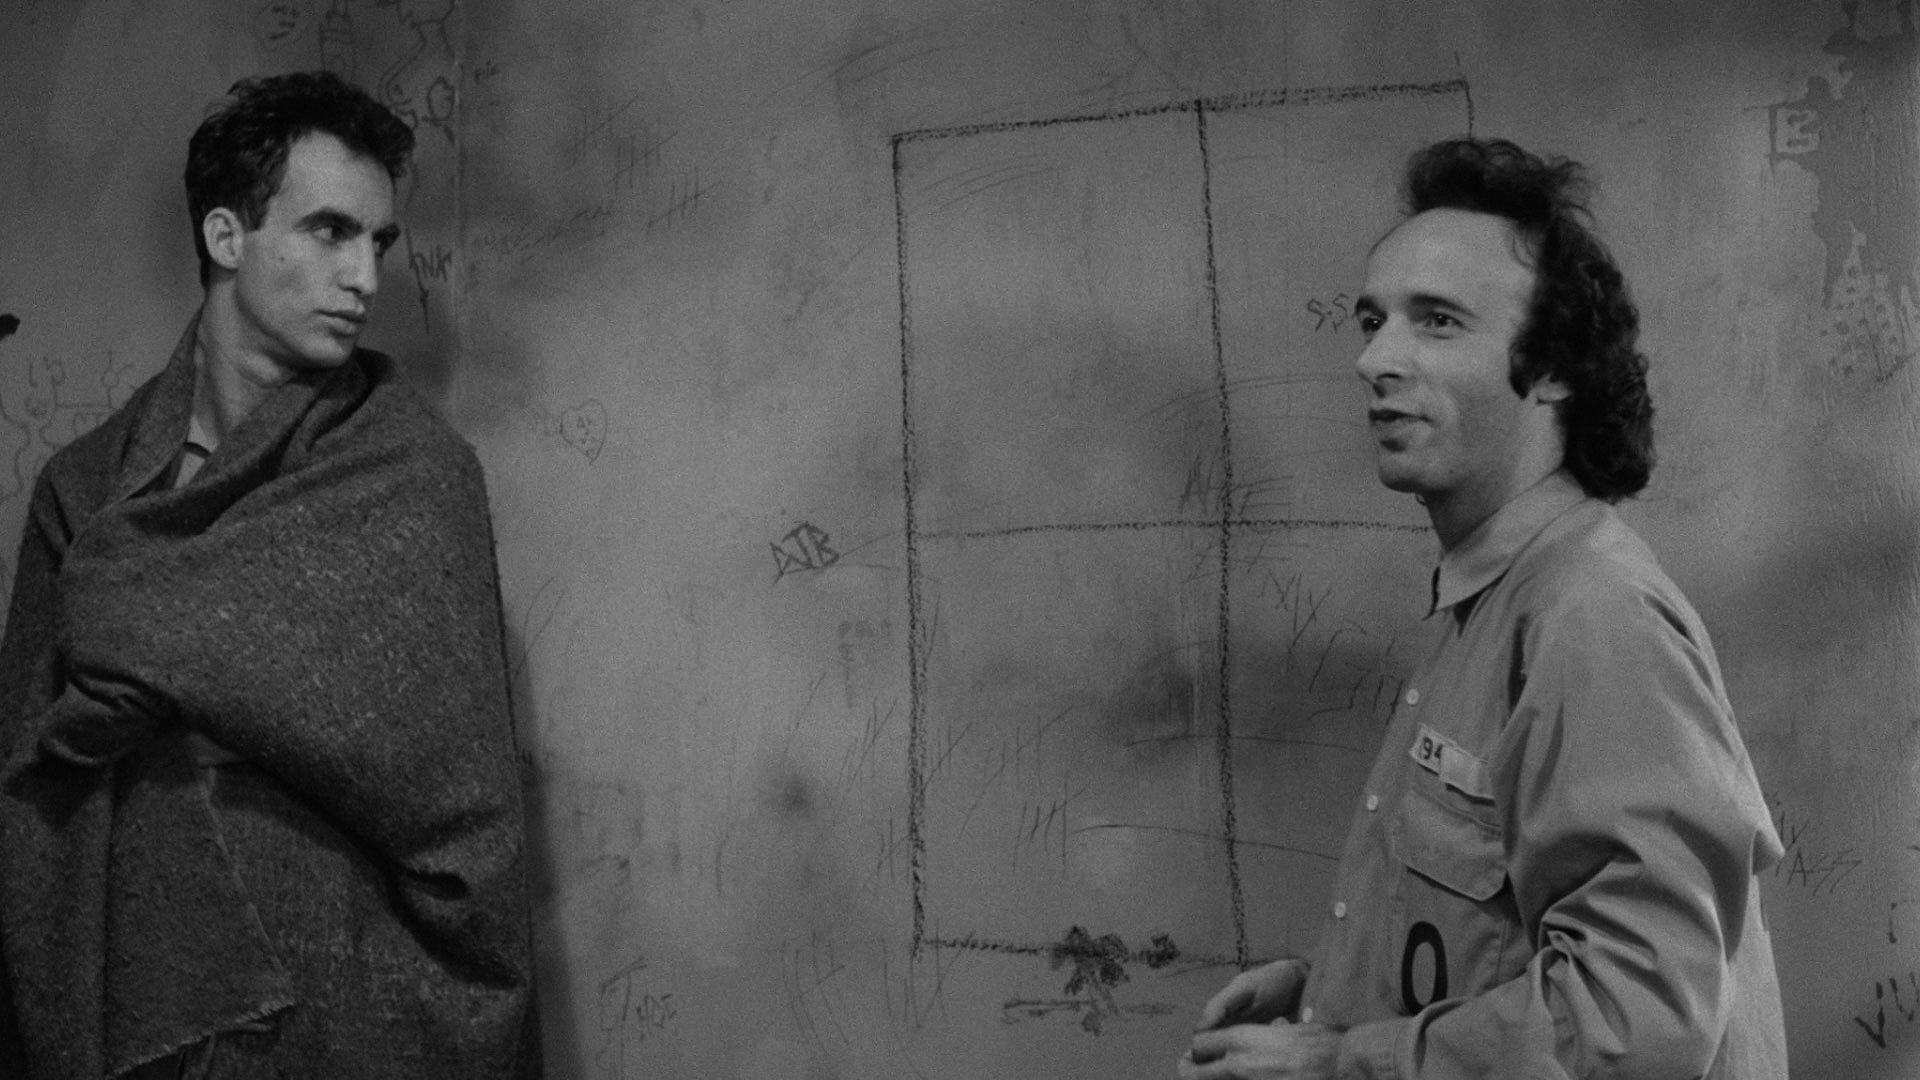 7 Art Cinema | Down By Law - 1986 - Jim Jarmusch | Tom Waits as Zack, John Lurie as Jack, Roberto Benigni as Roberto, Nicoletta Braschi as Nicoletta, Ellen Barkin as Laurette, Billie Neal as Bobbie, Rockets Redglare as Gig, Vernel Bagneris as Preston, Timothea as Julie, L.C. Drane as L.C., Joy N. Houck, Jr. as Detective Mandino, Carrie Lindsoe as Young Girl, Ralph Joseph as Detective, Richard Boes as Detective, Dave Petitjean as Cajun Detective | Directed by Jim Jarmusch, Produced by Alan Kleinberg, Written by Jim Jarmusch, Starring Tom Waits  John Lurie  Roberto Benigni, Music by John Lurie Tom Waits, Cinematography  Robby Muller, Edited by Melody London, Production company PolyGram Pictures, Island Pictures, Black Snake, Distributed by Universal Pictures, Release dates September 20 1986, Running time 107 minutes, Country United States, Language English | Film Photograph